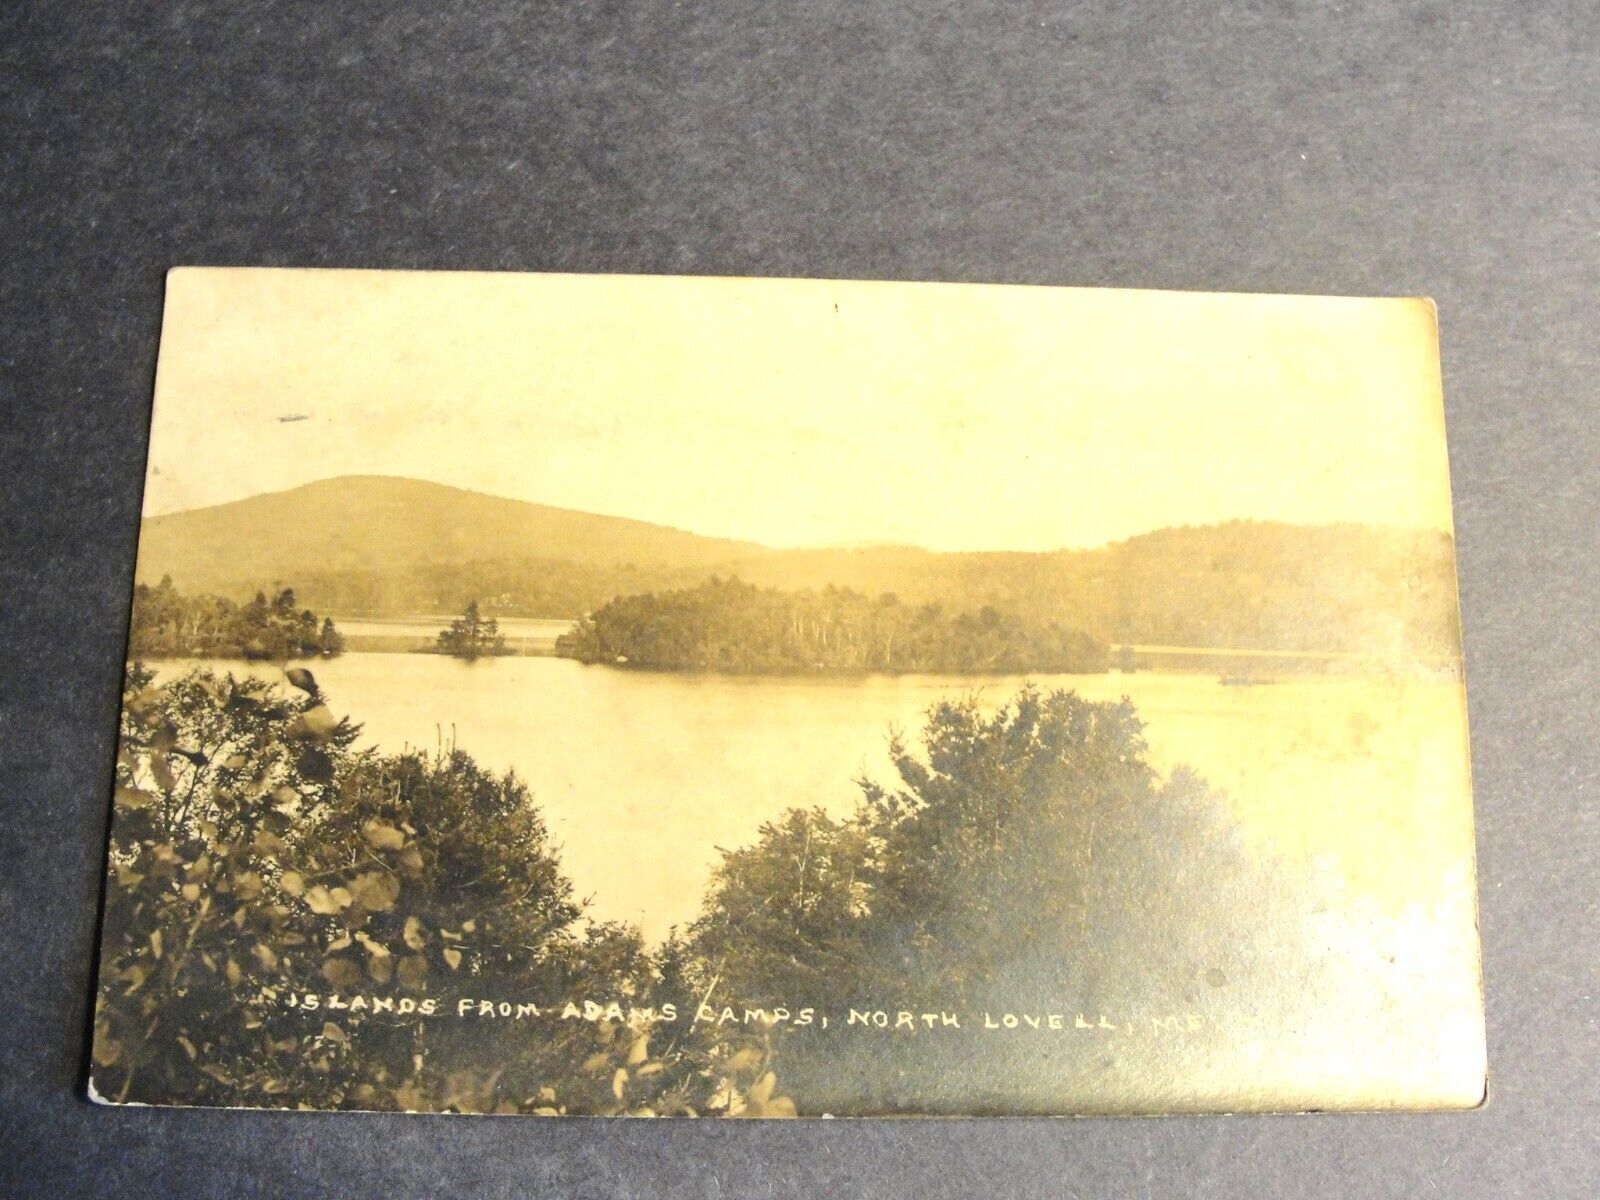 Islands from Adams Camps- North Lovell, Maine -1927 Real Photo Postcard (RPPC).